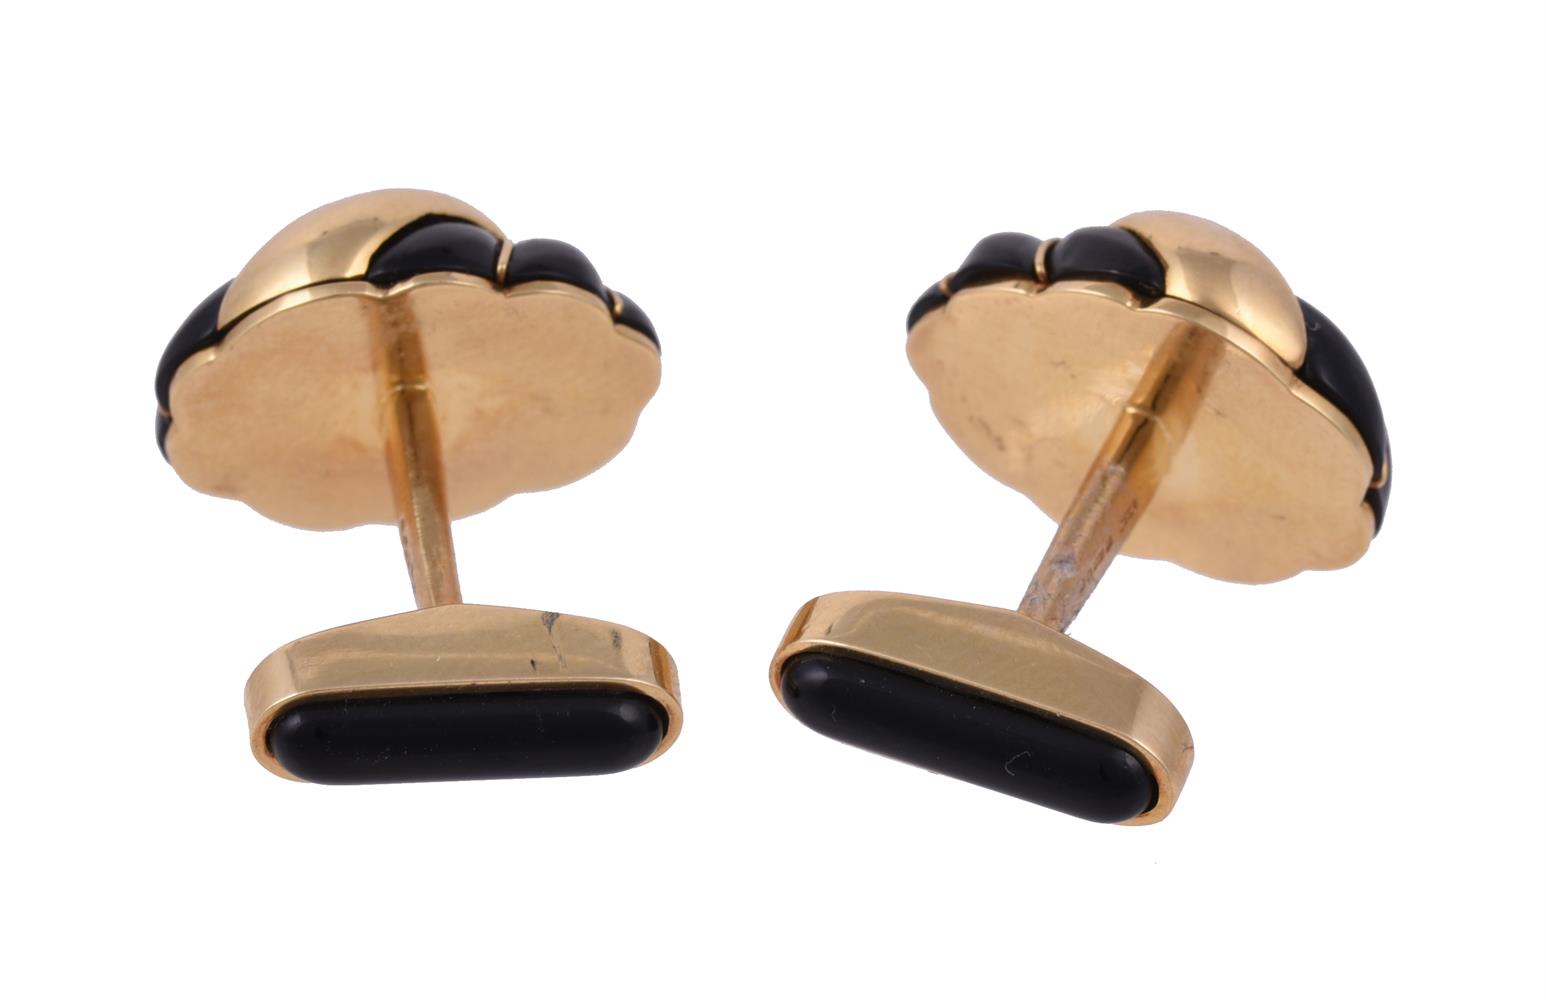 A pair of ruby and onyx cufflinks by William & Son - Image 3 of 3